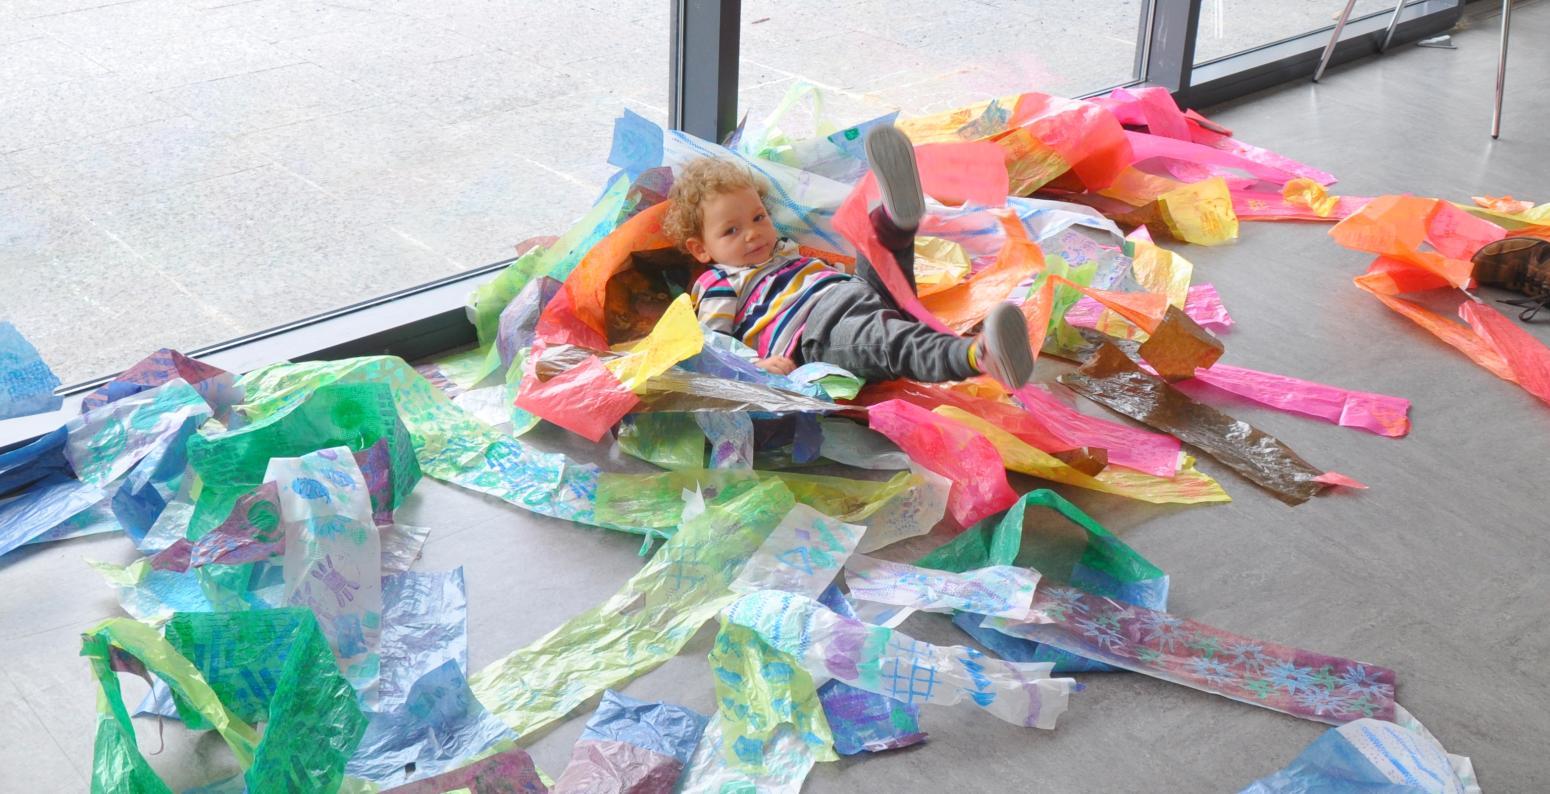 A young child playing within a pile of colorful papers on the ground.